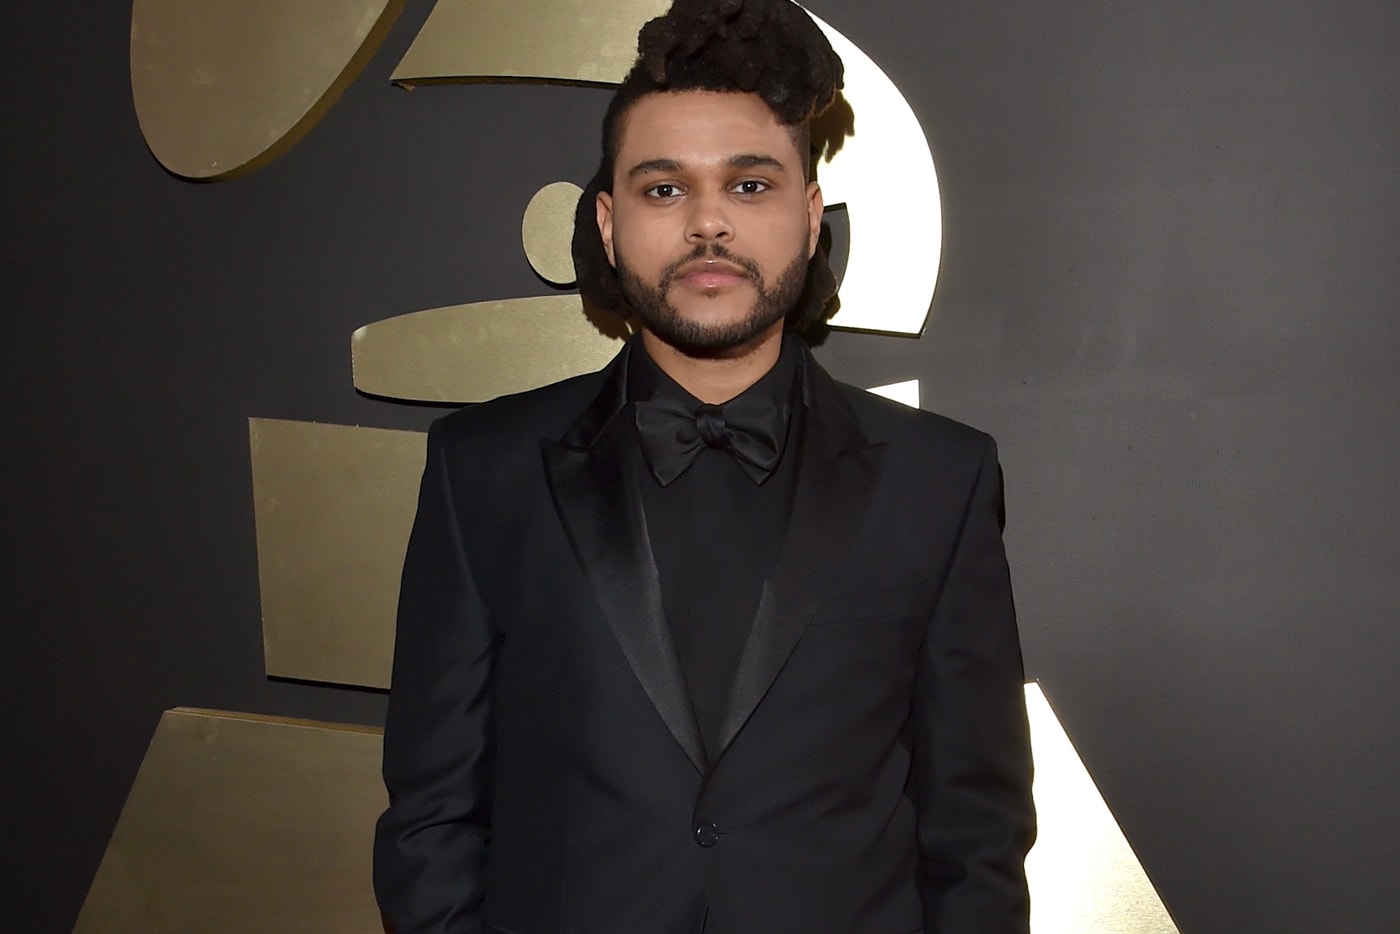 The Weeknd Performs "Can't Feel My Face" & "In the Night" at the 2016 GRAMMYs